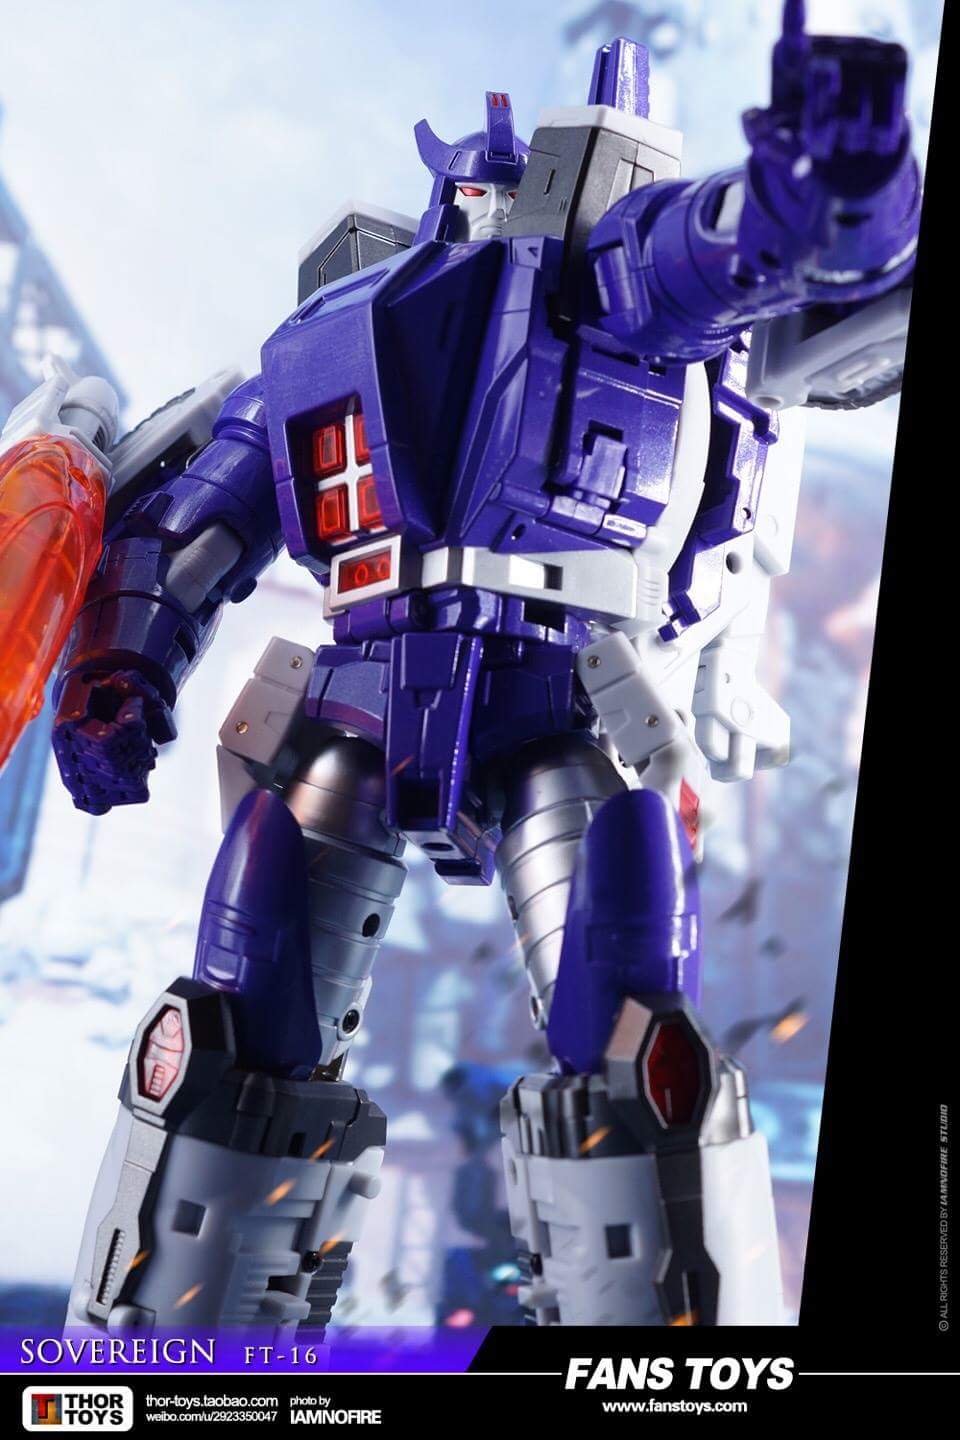 [Fanstoys] Produit Tiers - FT-16 Sovereign - aka Galvatron - Page 3 PlbxAWUD